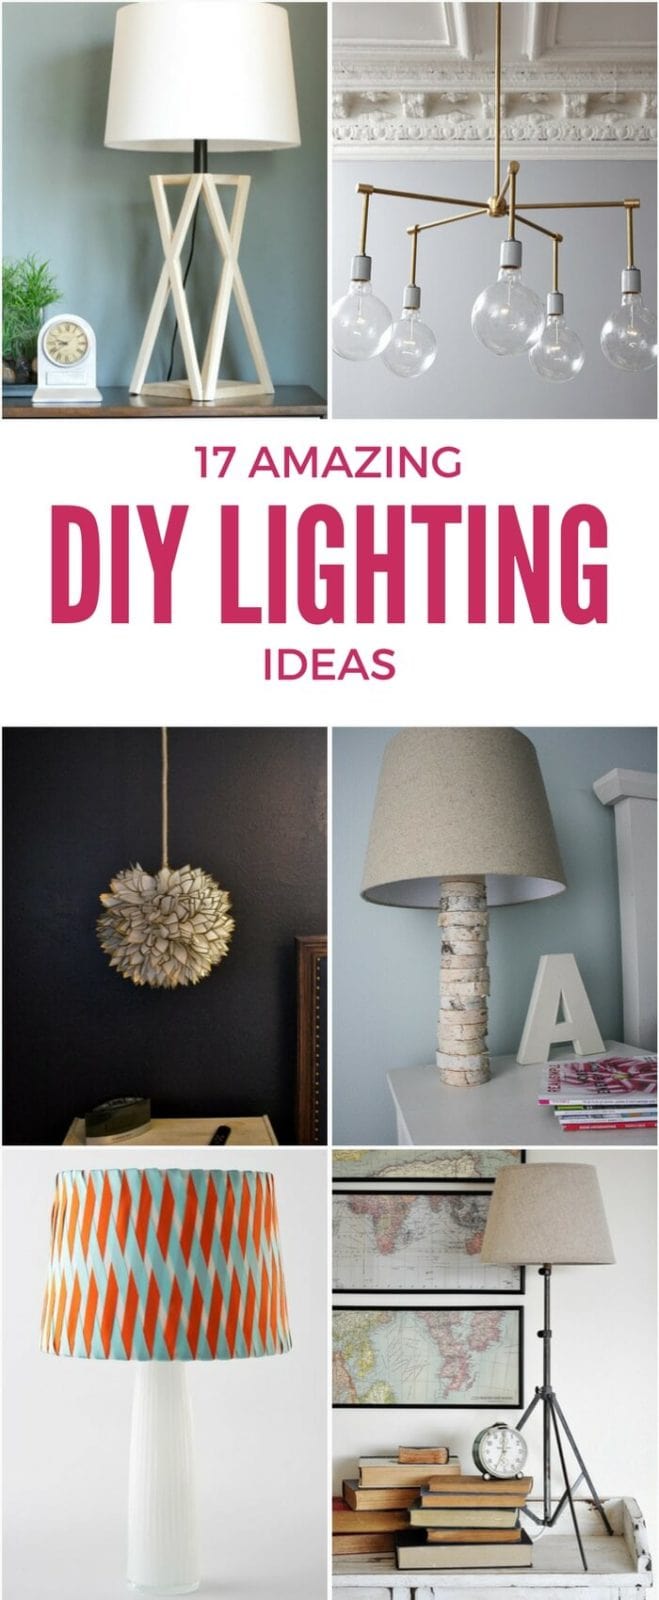 Light fixtures and lamps can be SO expensive, but they don't have to be! These DIY lighting ideas are amazing and are easy on your budget!